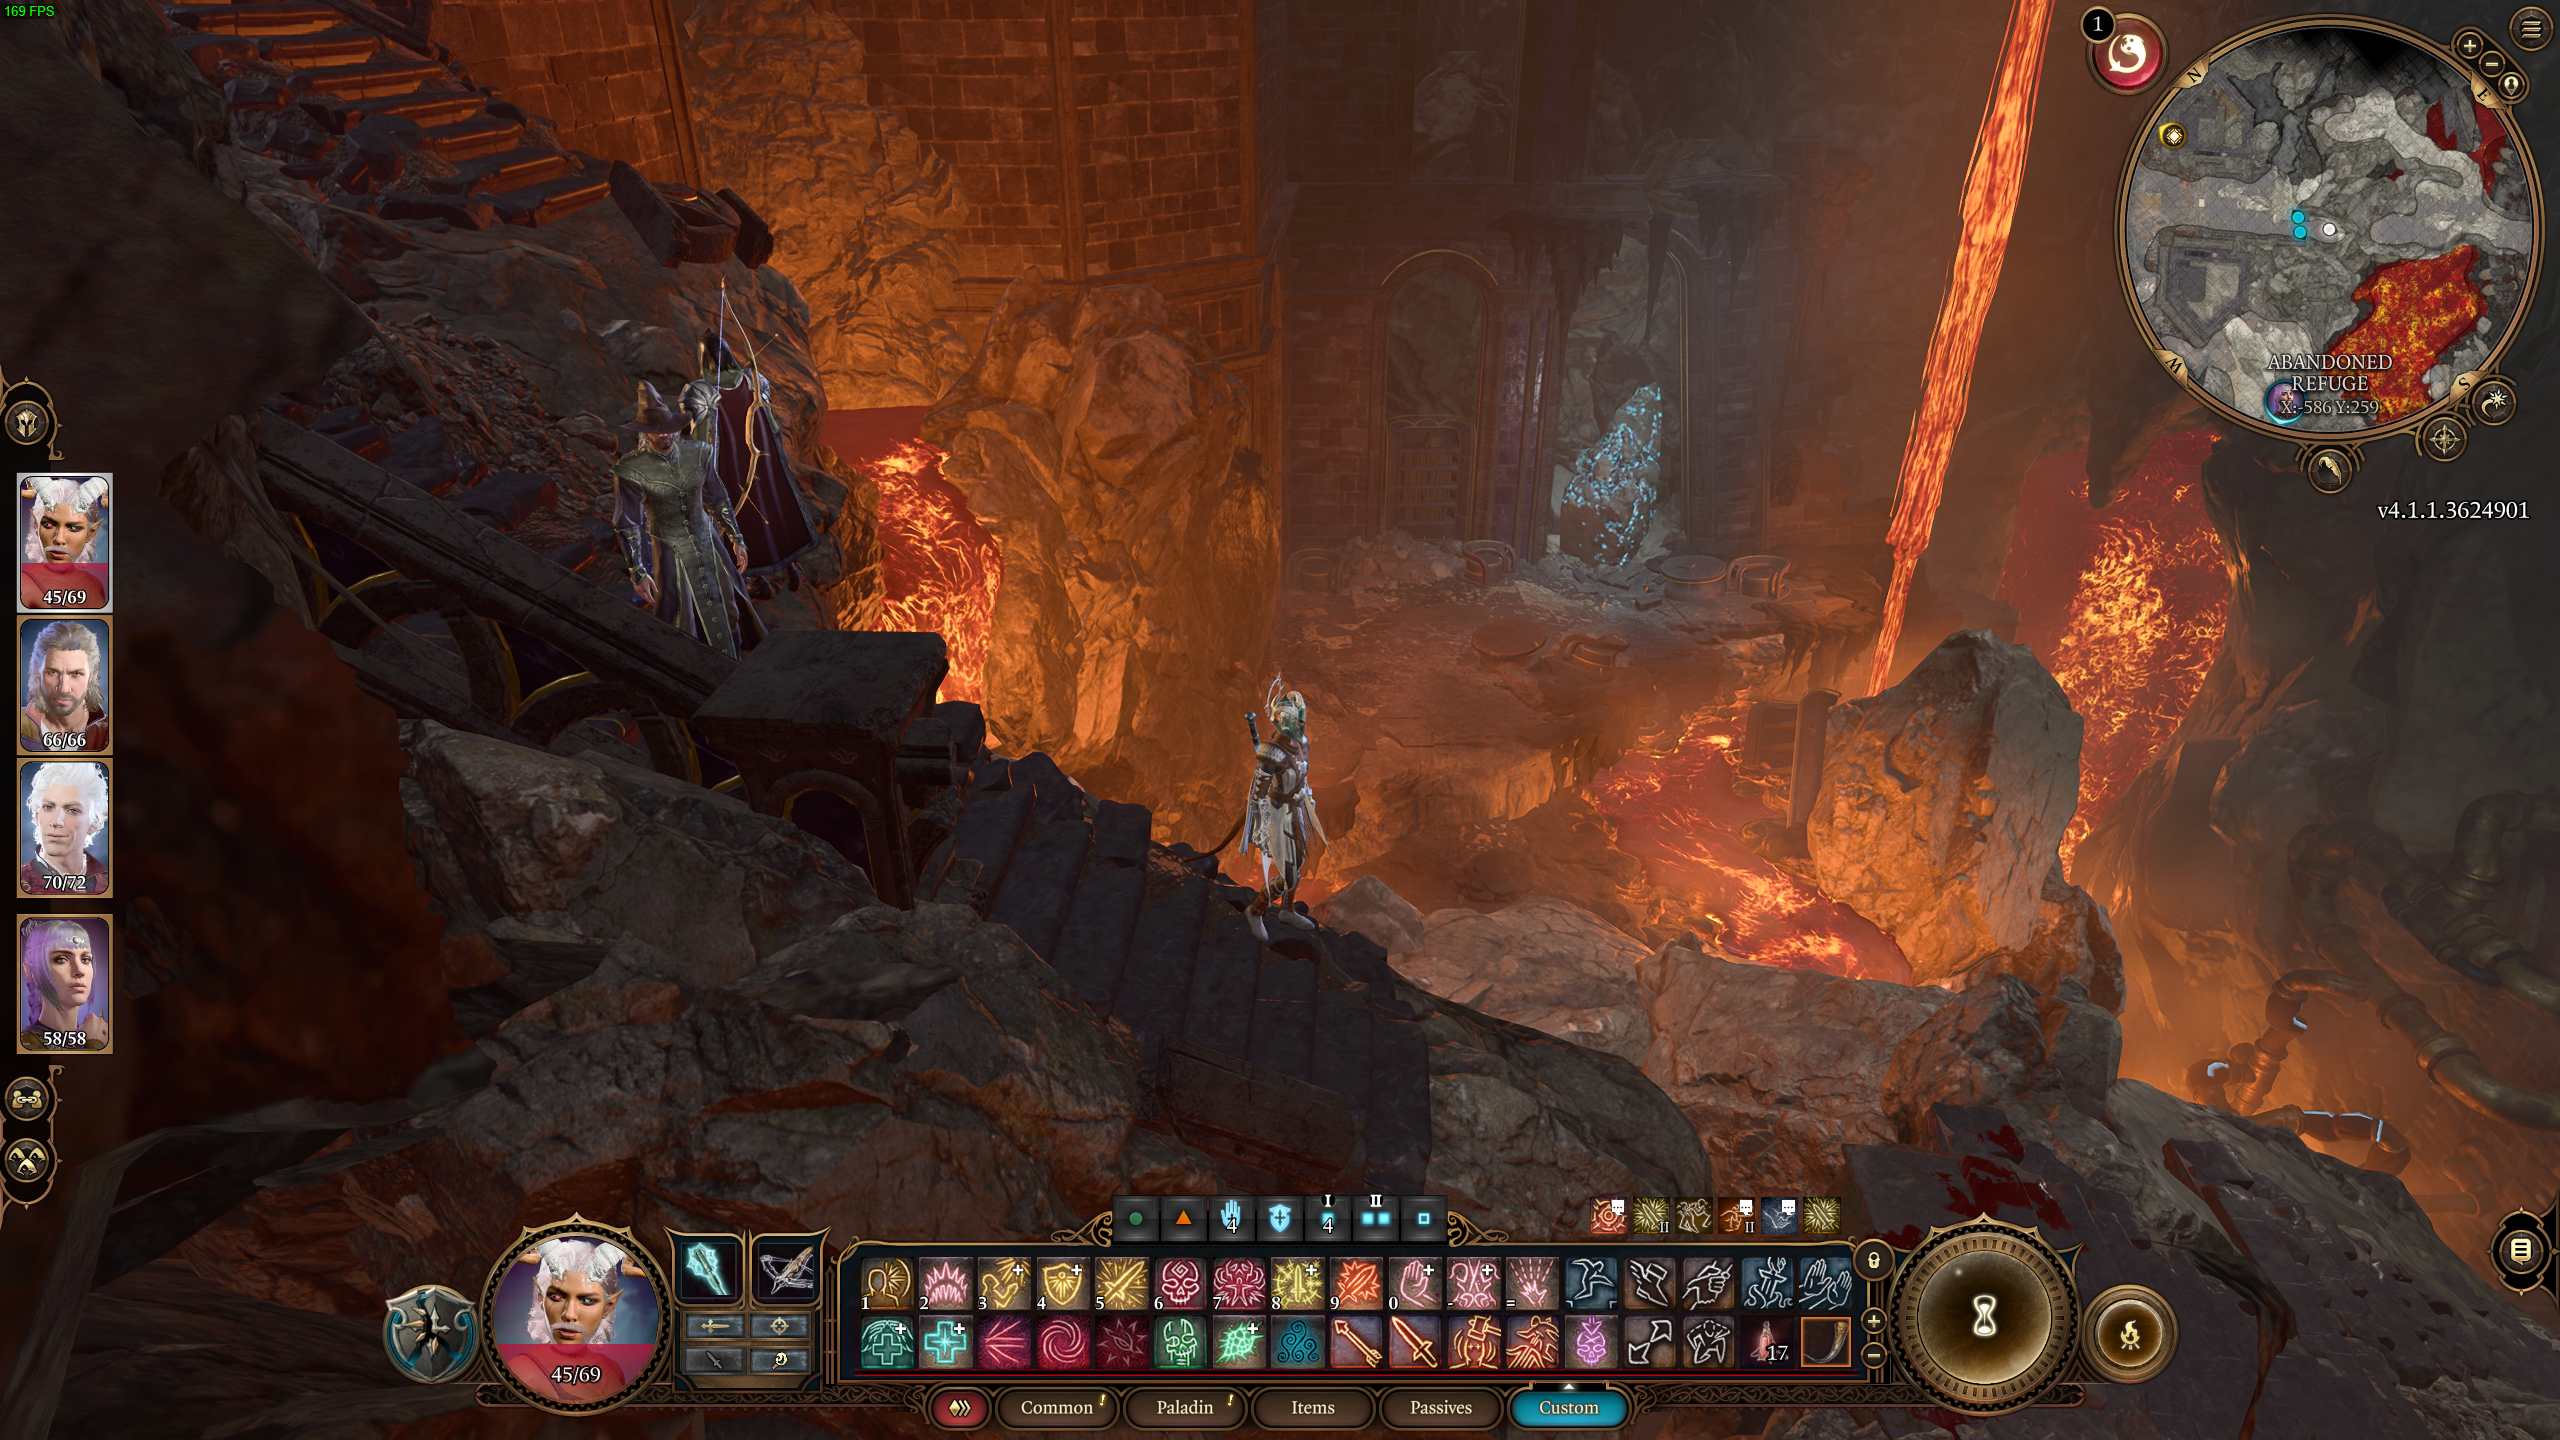 The Mithral Vein next to a river of lava in Baldur's Gate 3.